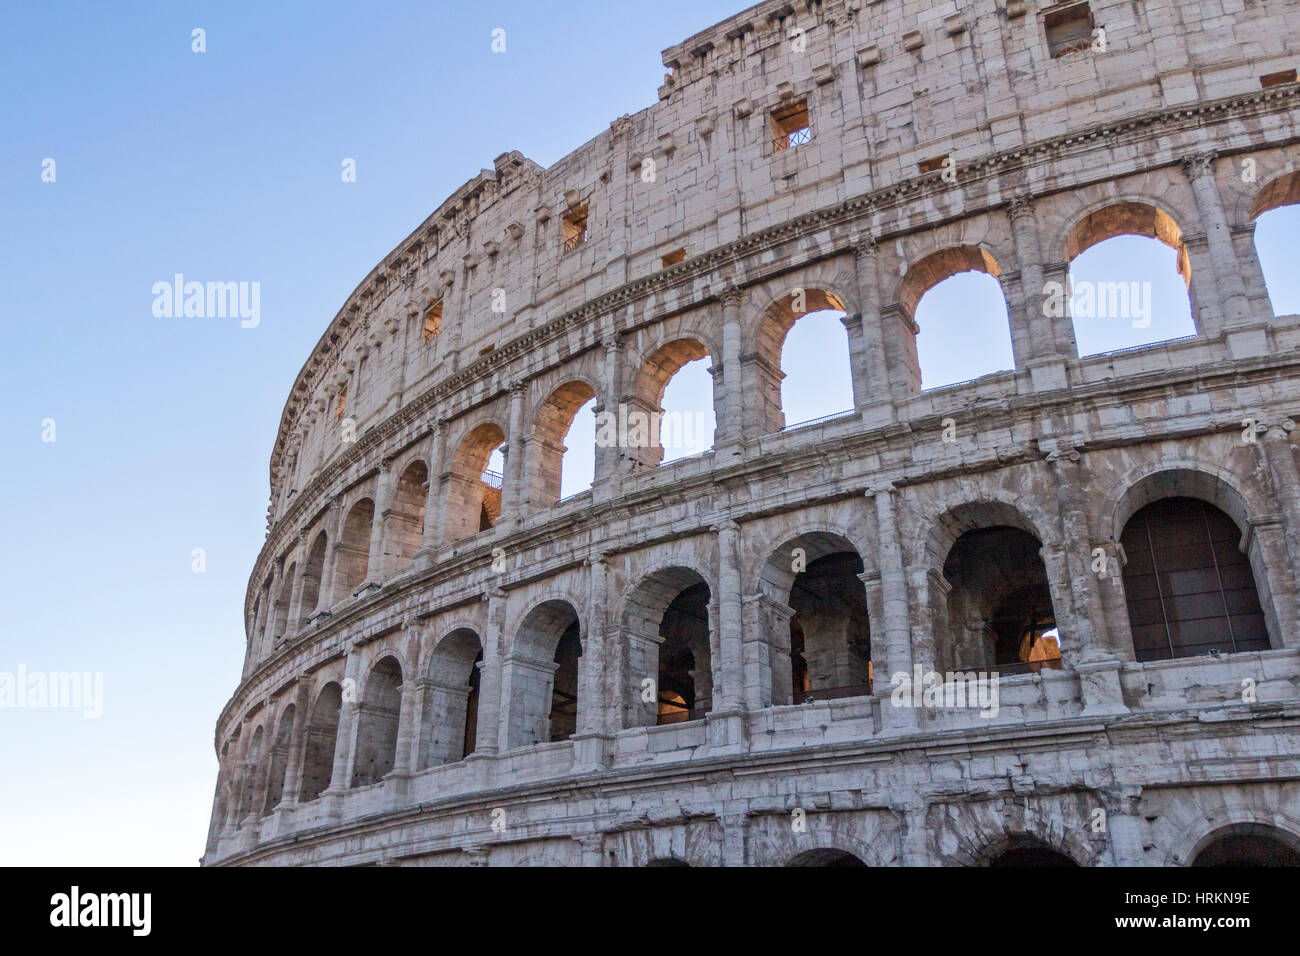 A view of the Roman Colosseum, Rome, Italy. Stock Photo